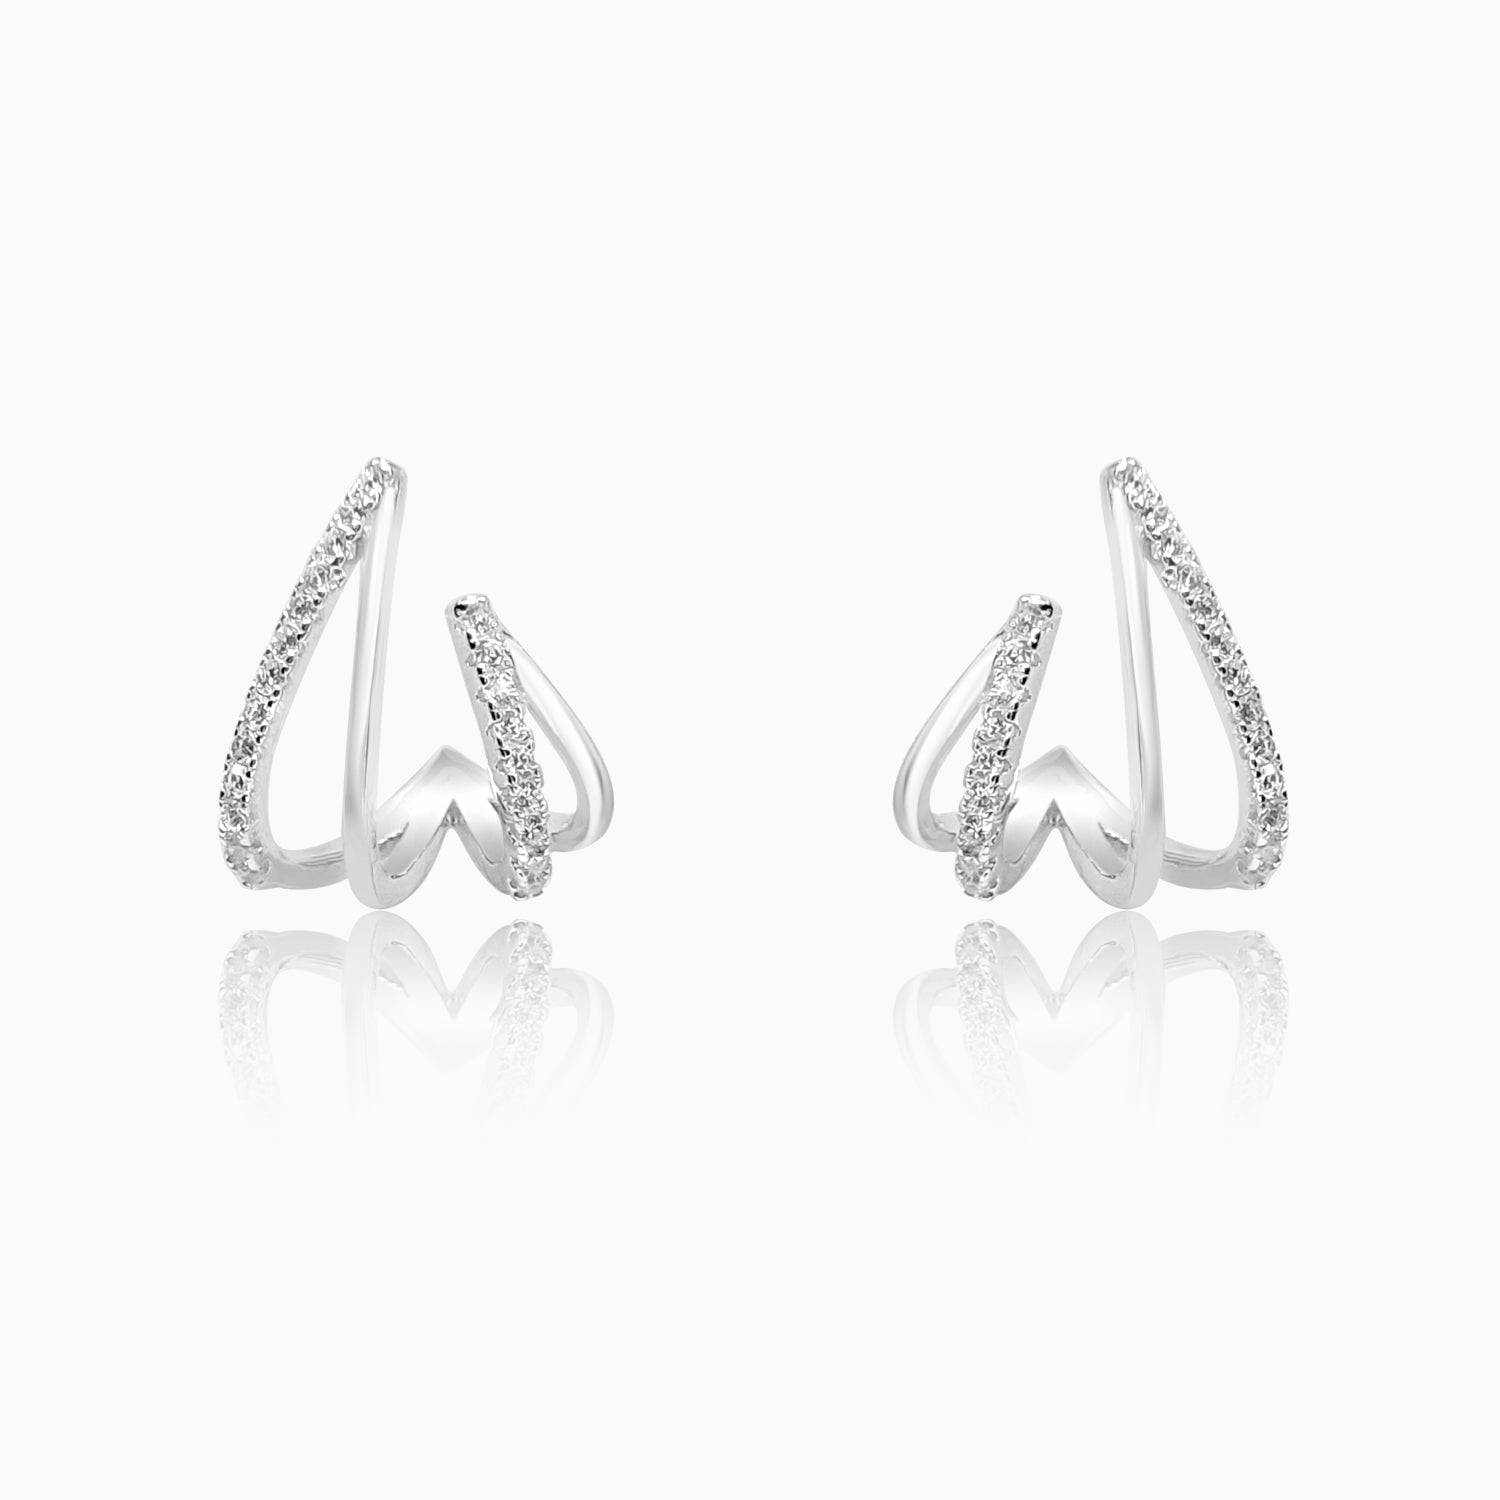 Silver Sparkling Claw Earrings